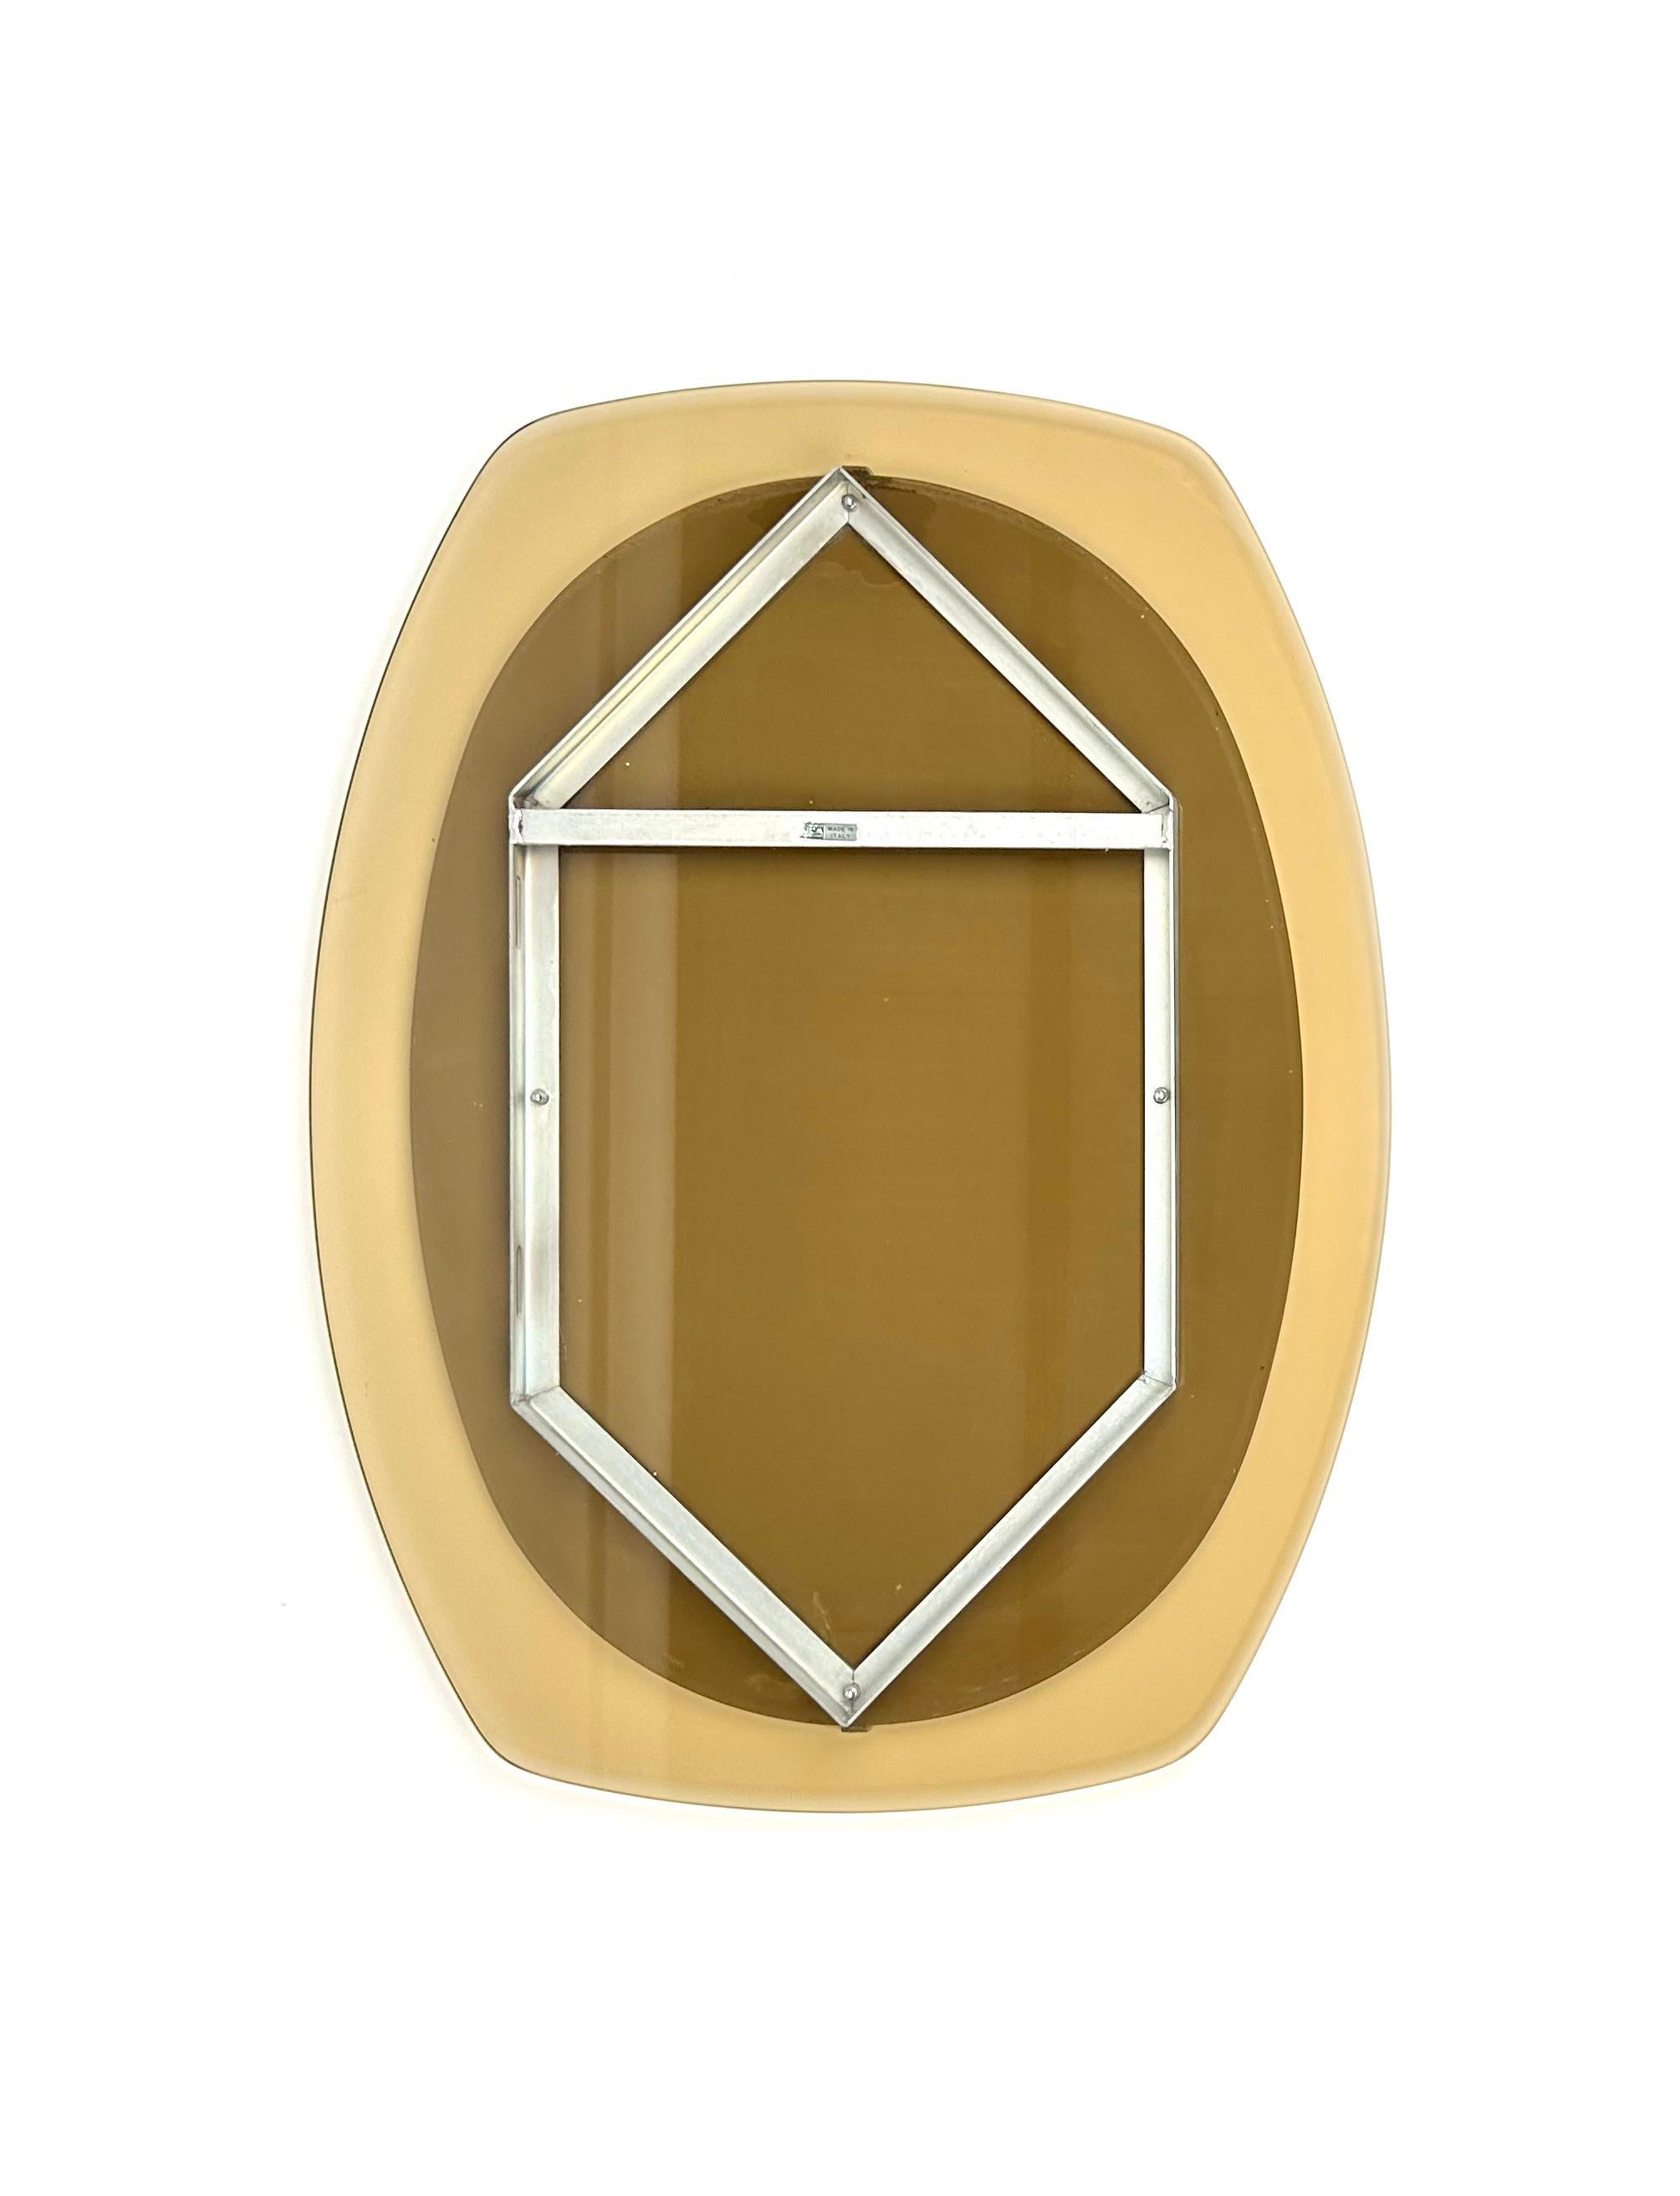 Midcentury Wall Mirror Beveled Smoked Glass Frame by Veca, Italy 1970s For Sale 5